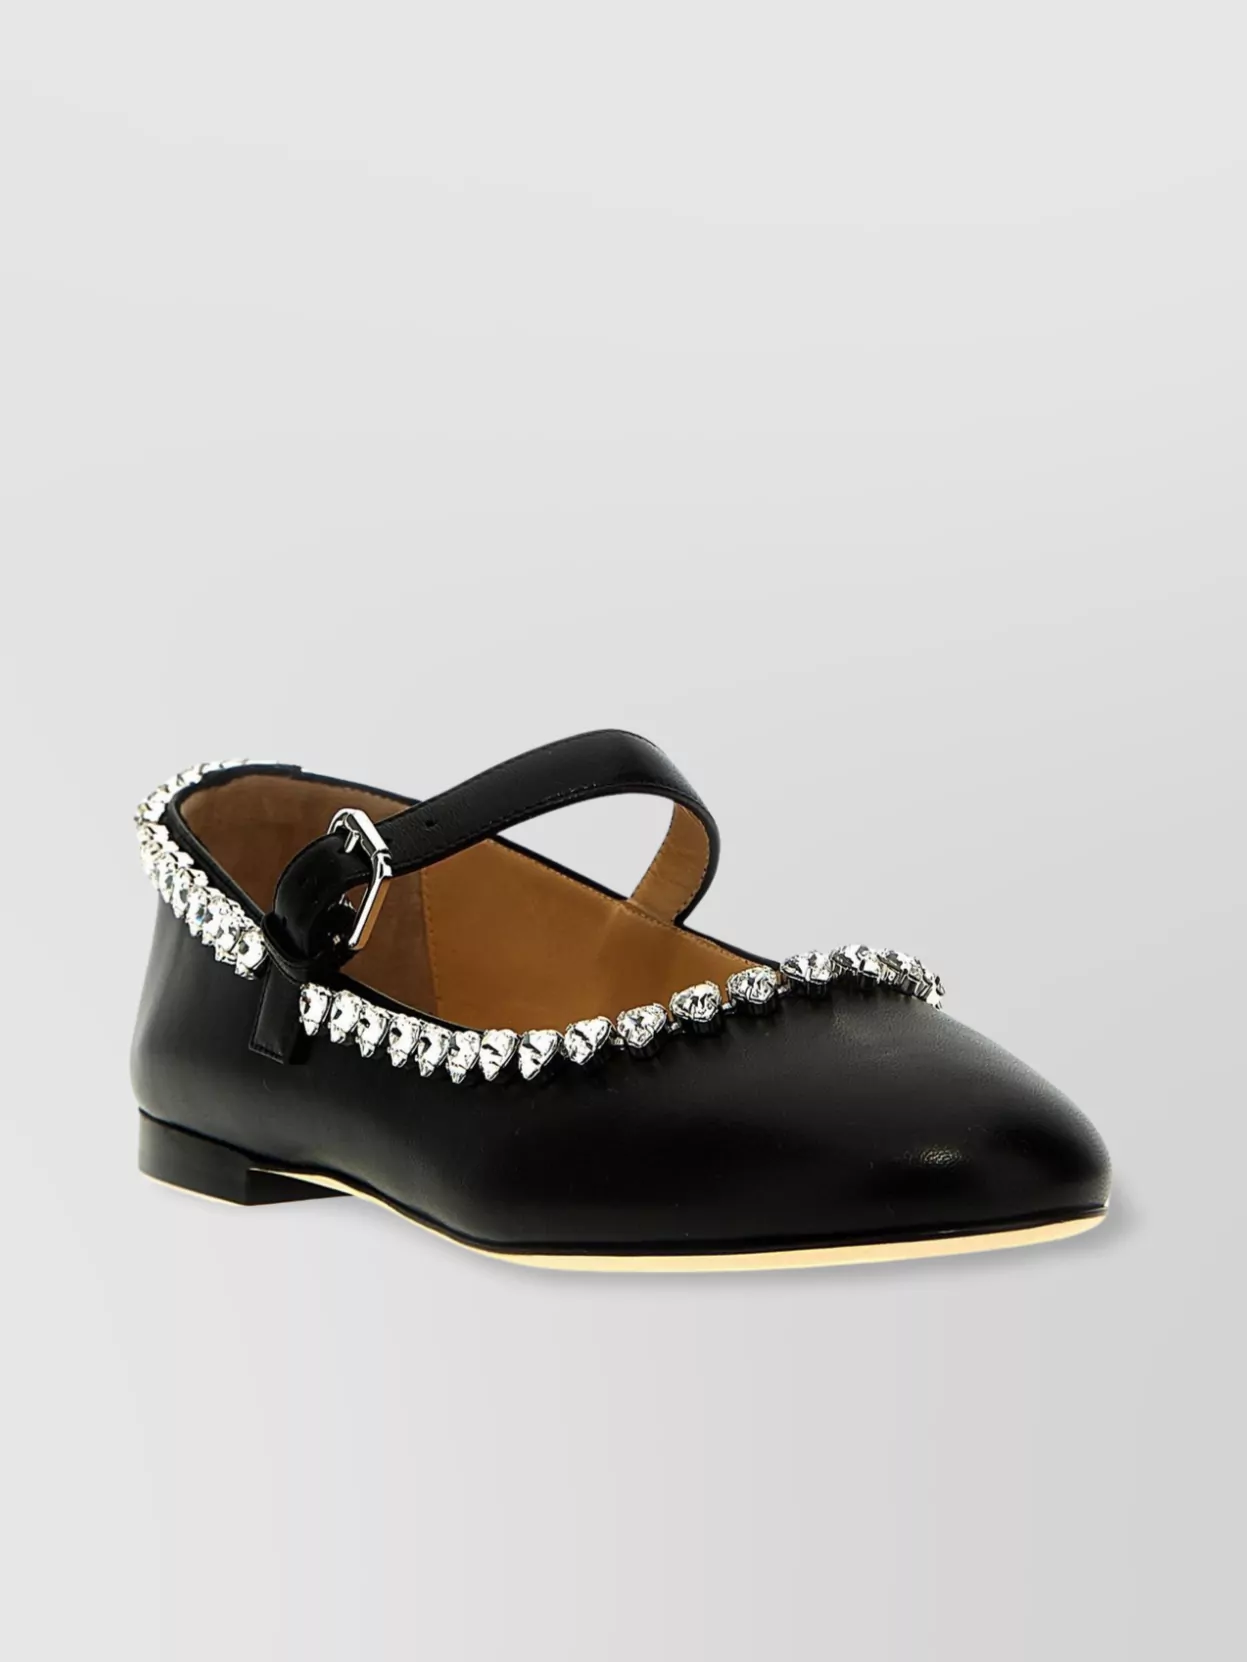 Shop Mach & Mach Almond Toe Leather Ballet Flats With Embellished Trim